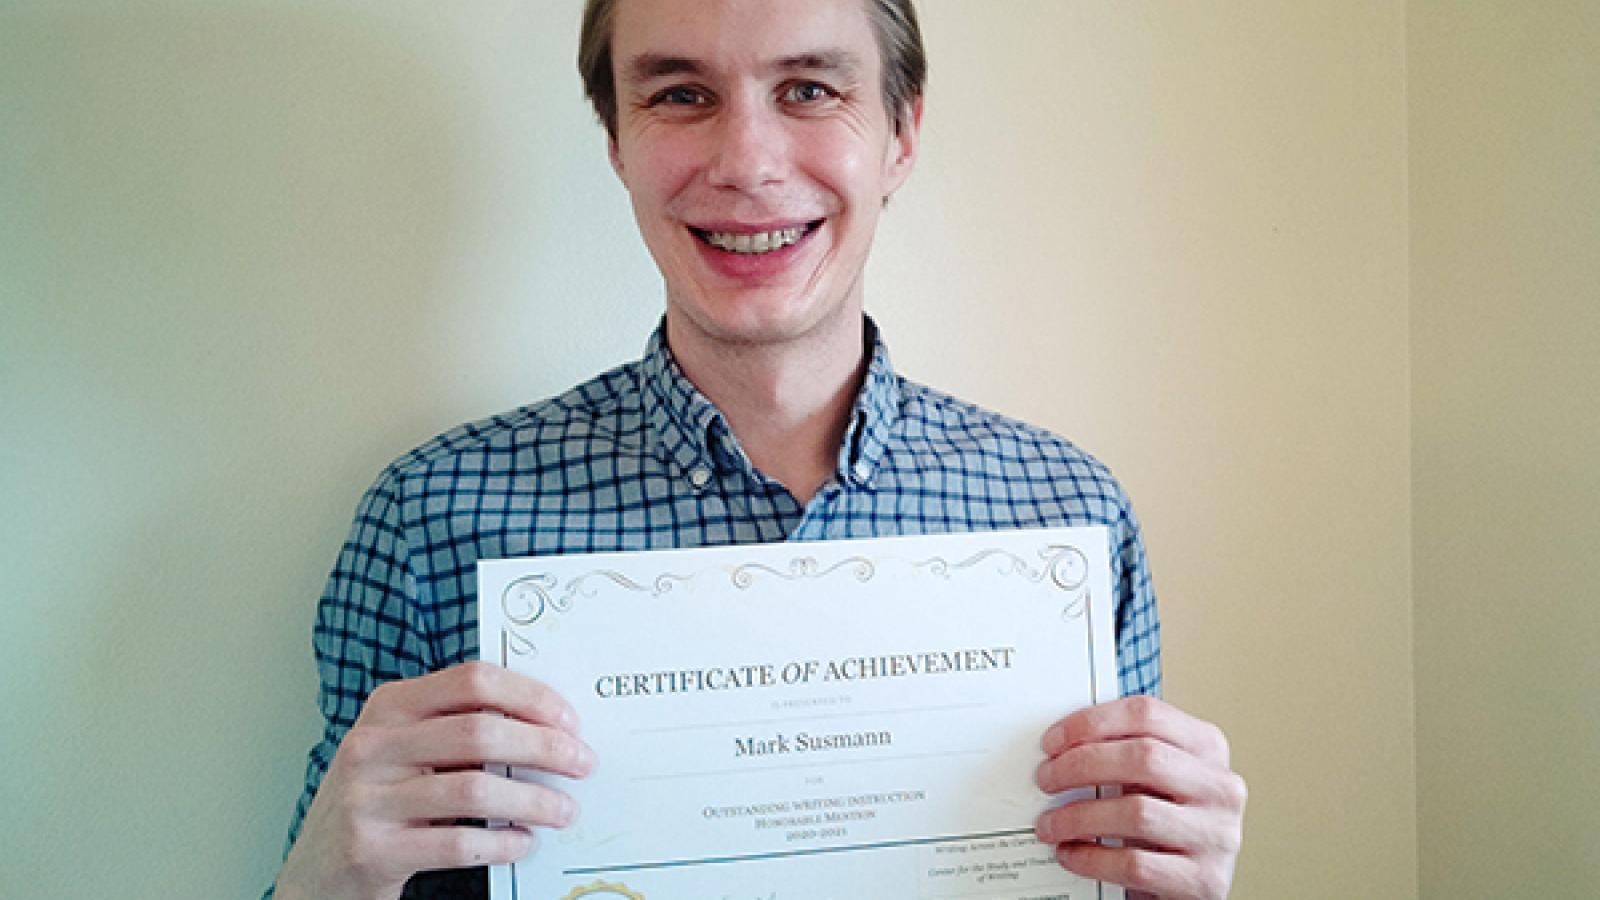 Mark Susmann, honorable mention for the 2020-2021 WAC Award for Outstanding Writing Instruction, holds his award certificate in front of a cream wall.